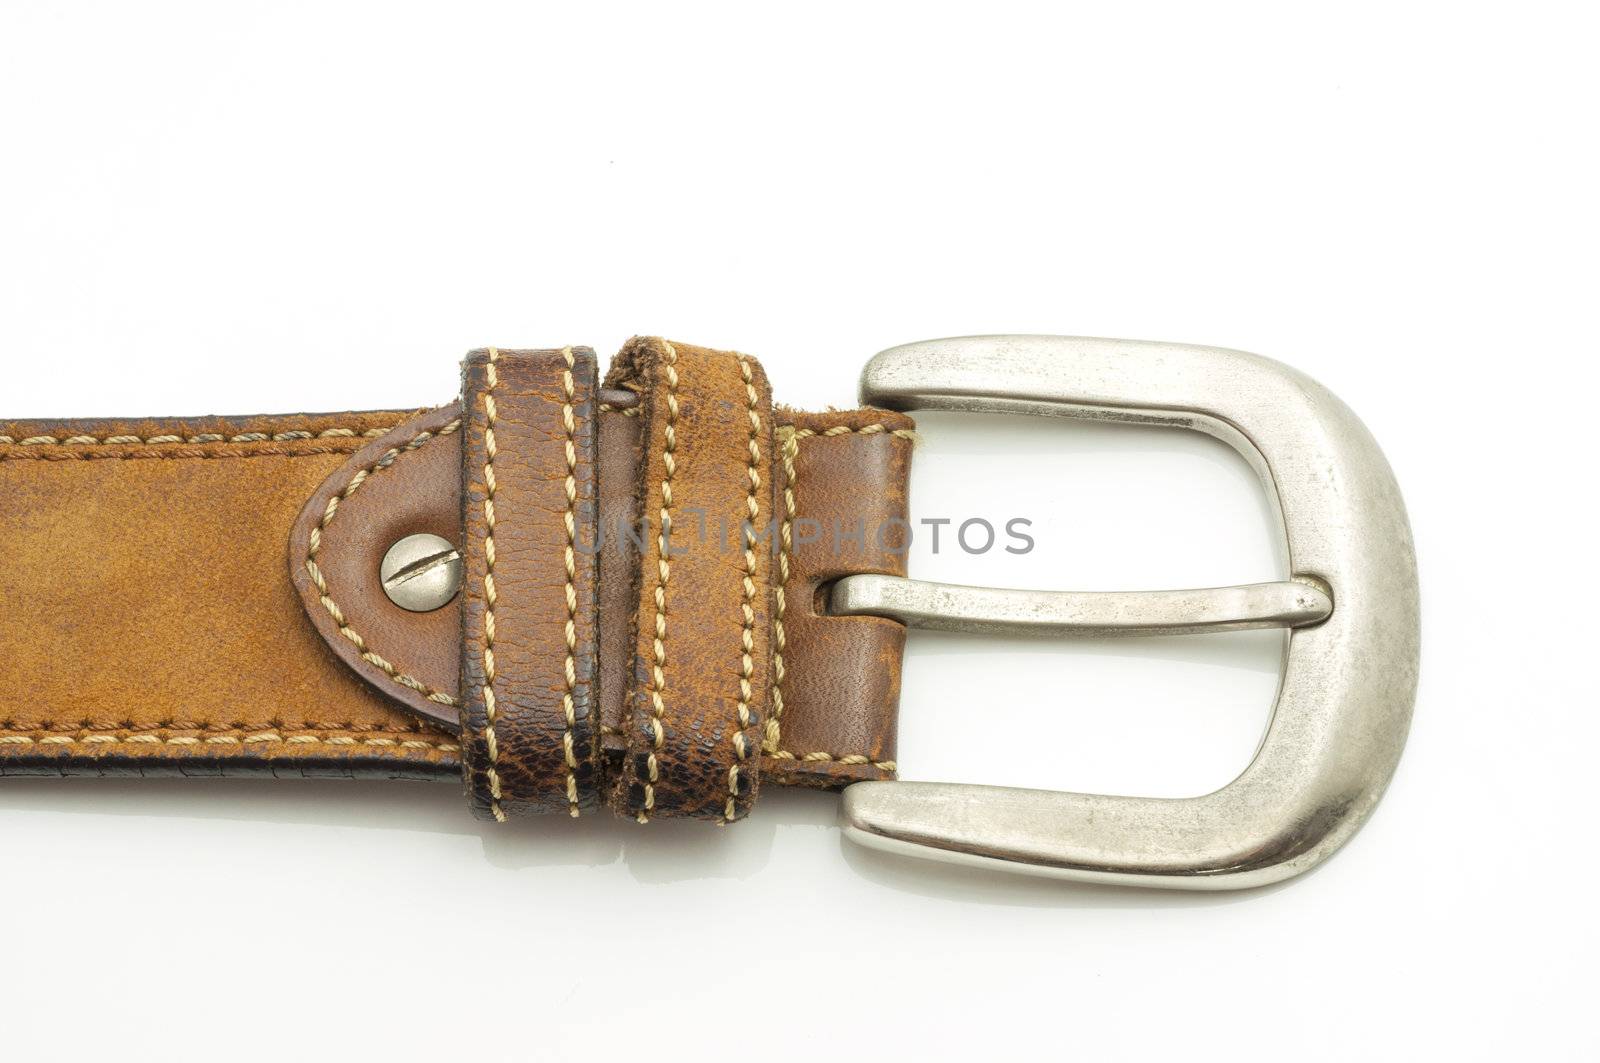 Rugged Brown Leather Jean Belt with Silver Buckle Isolated on White